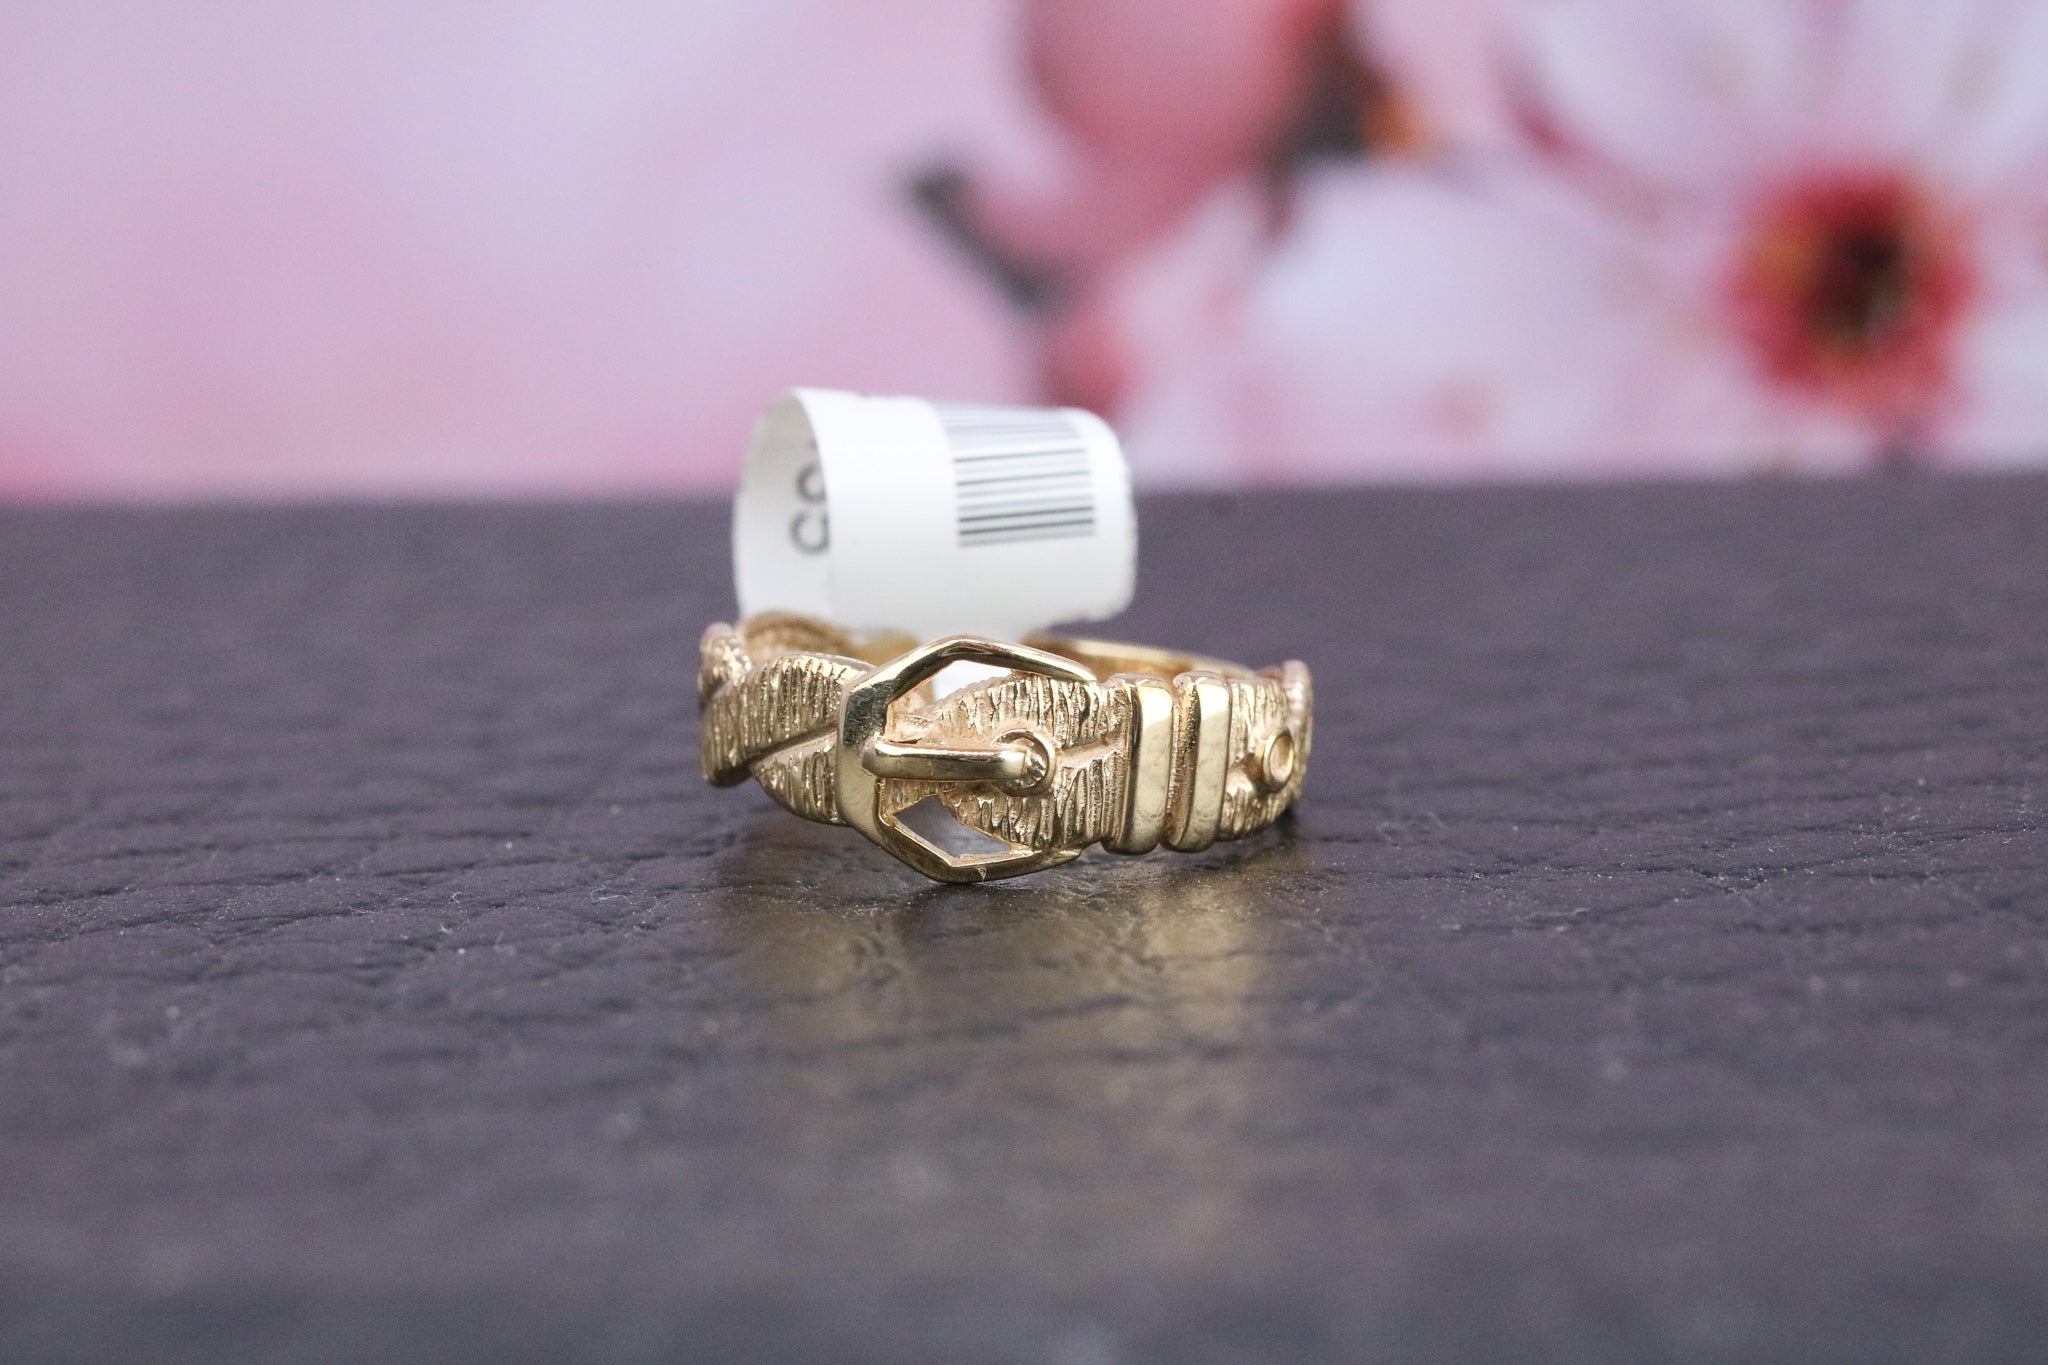 9ct Gold Buckle Ring - CO1424 - Hallmark Jewellers Formby & The Jewellers Bench Widnes